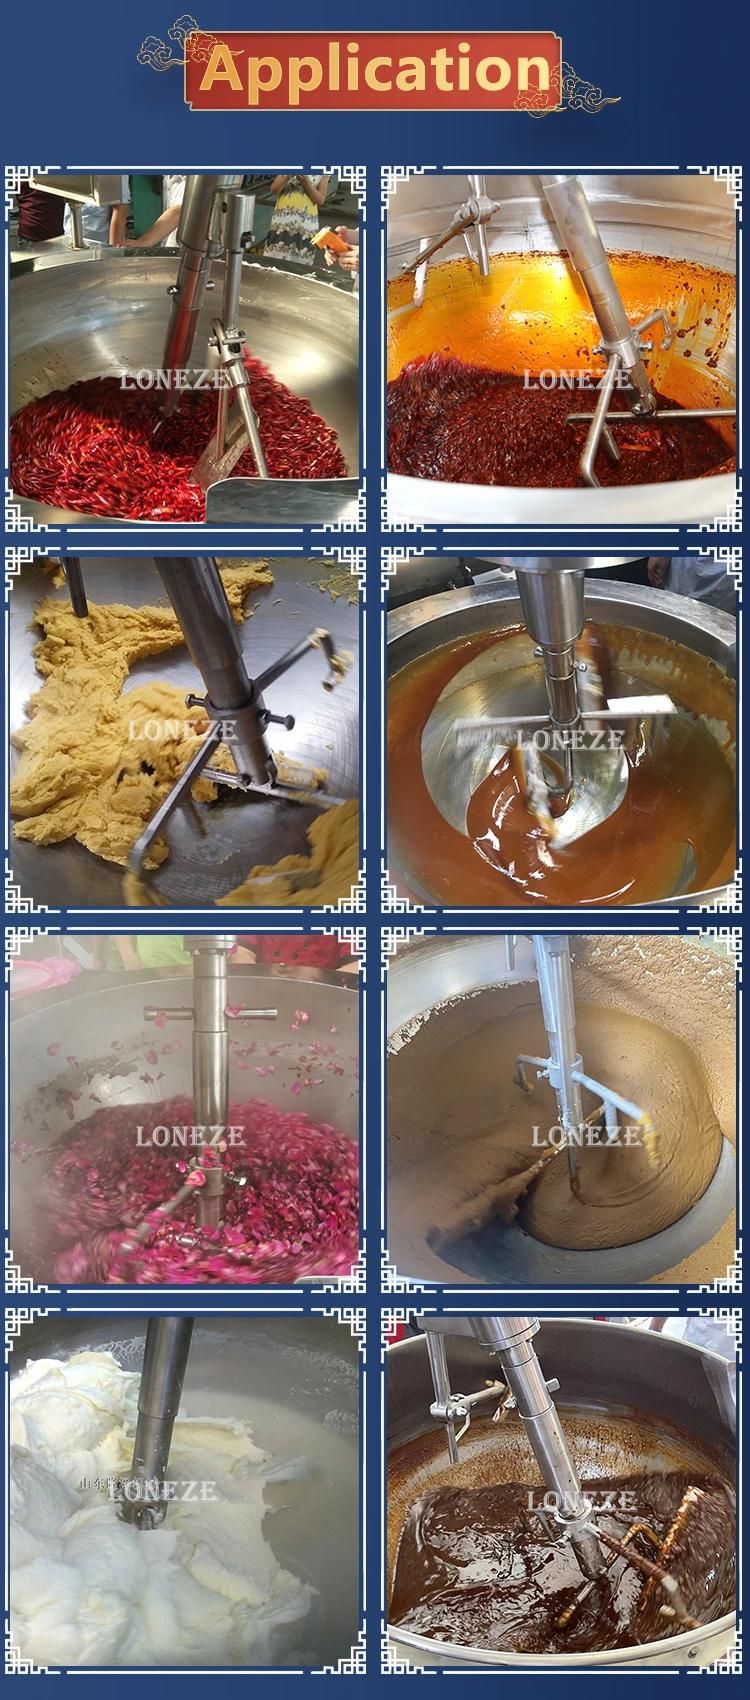 Industrial Chilli Sauce Making Machine Gas Electric Steam Cooking Mixer with Stirrer